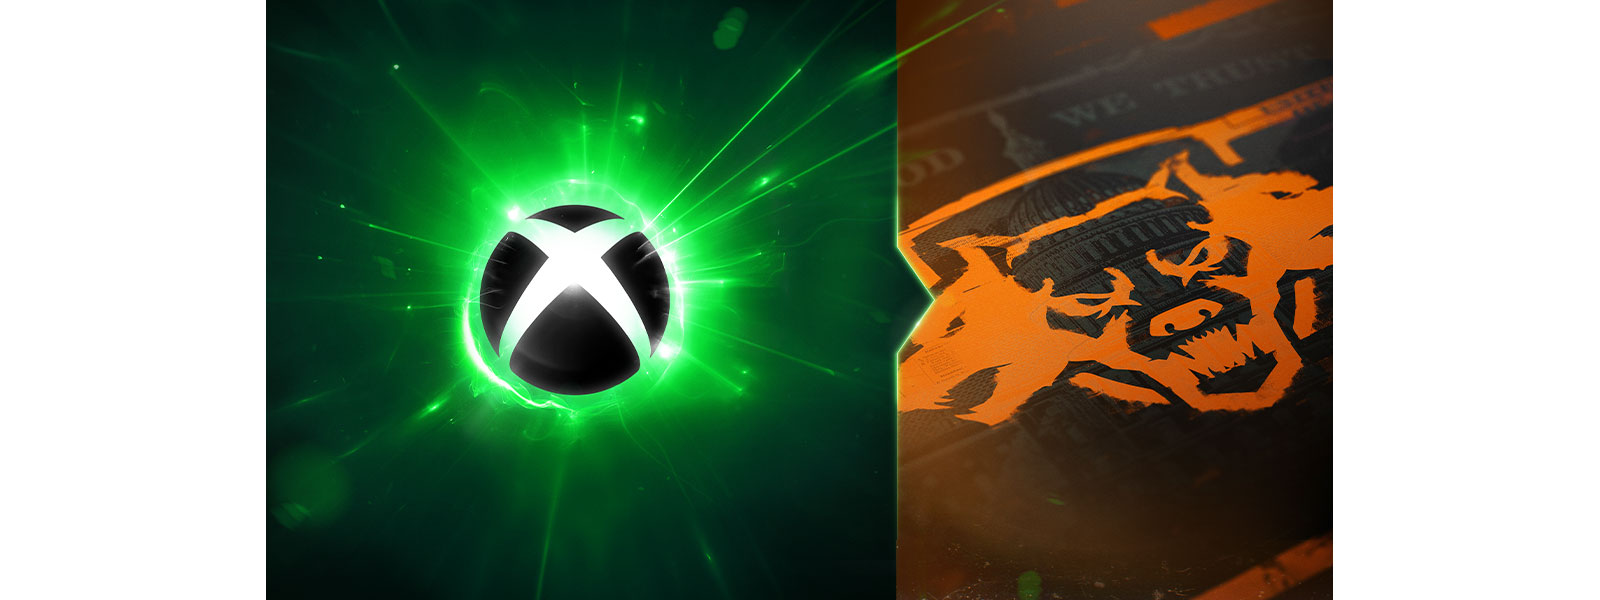 Left: Xbox sphere surrounded by pulsing green energy. Right: A three headed dog stamped over a depiction of the US Capitol with the text "IN GOD WE TRUST".